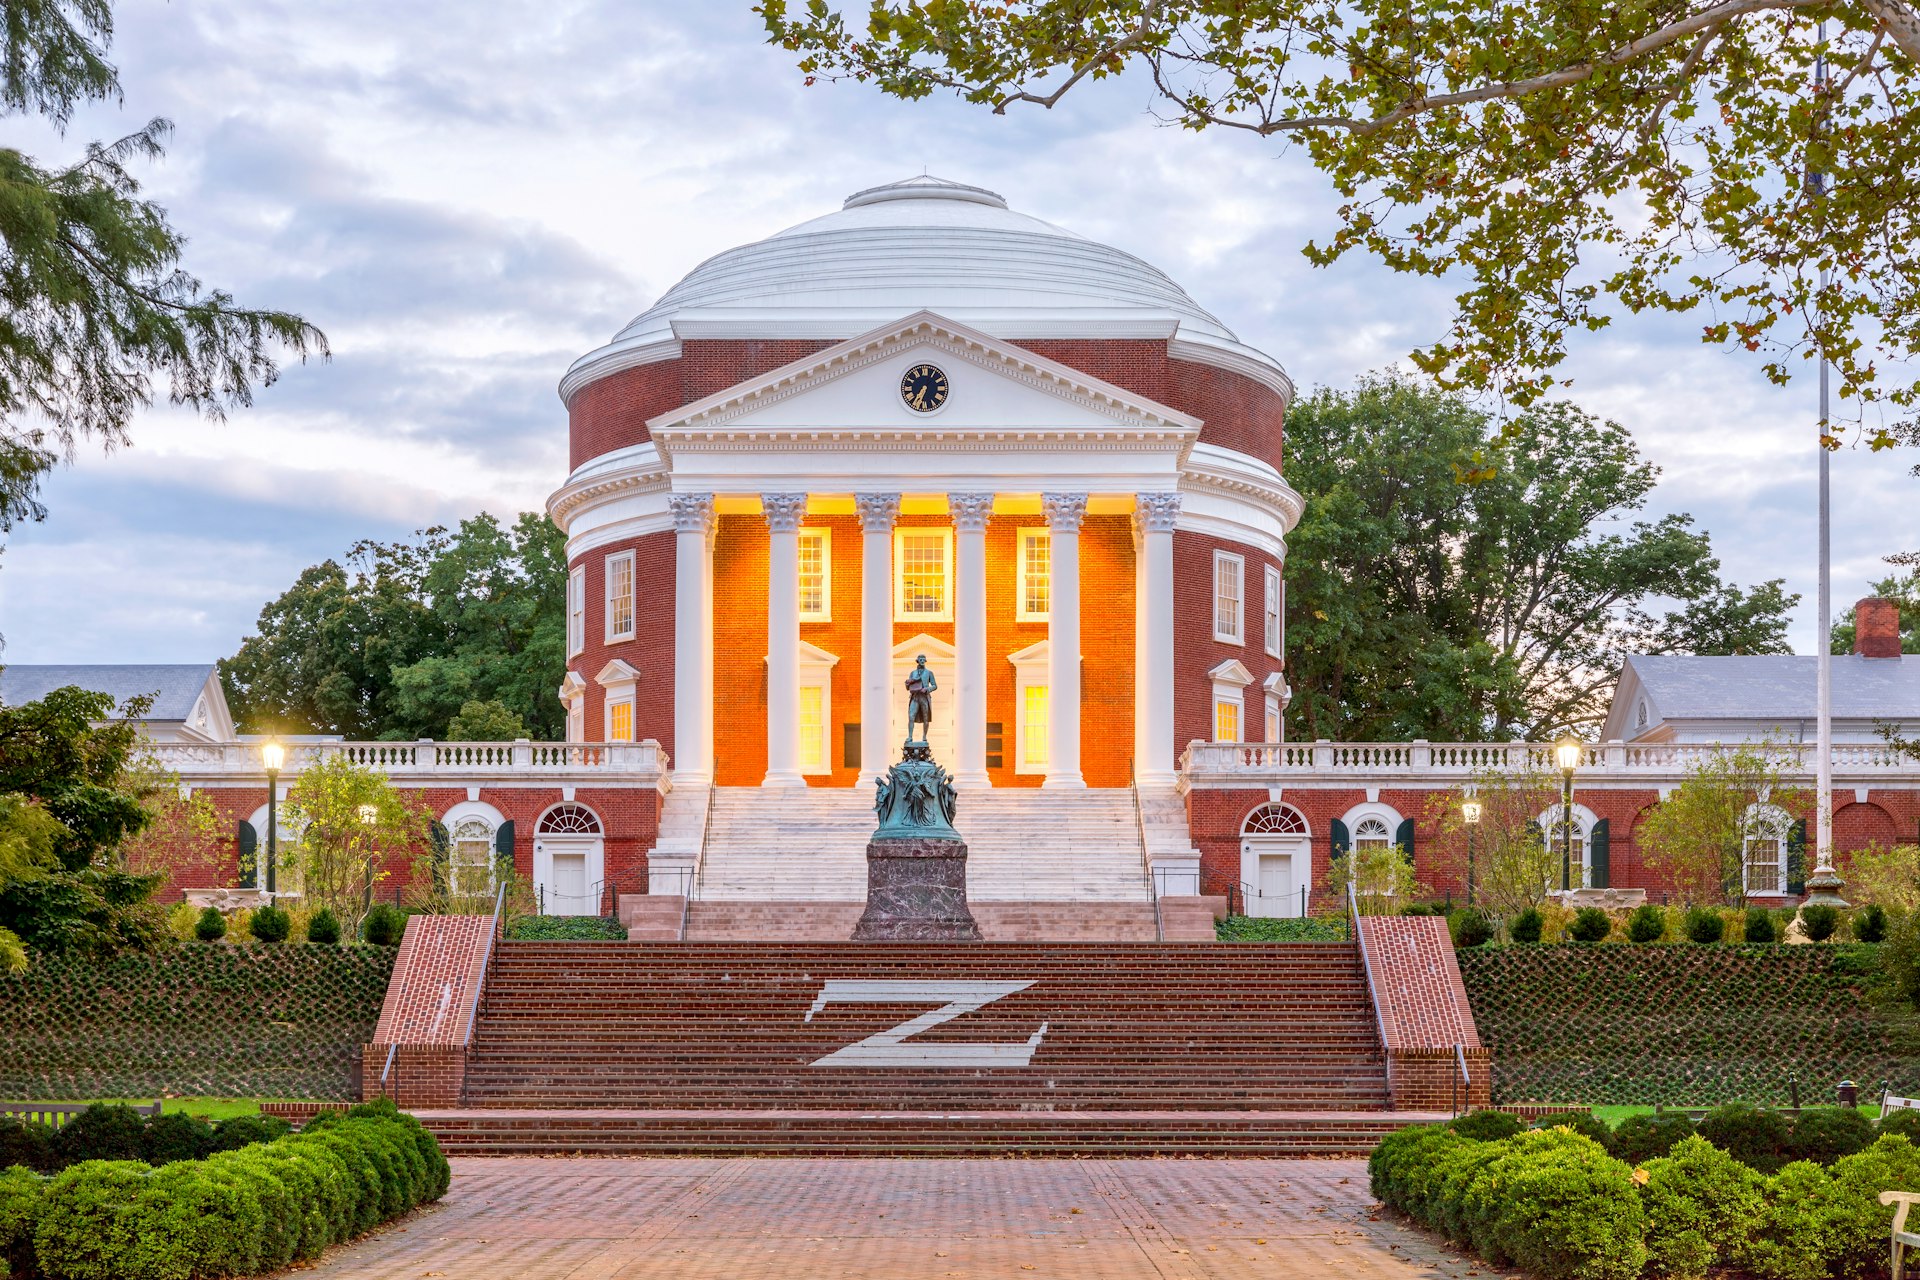 The Rotunda at the University of Virginia at sunset with the Thomas Jefferson statue in Charlottesville, Virginia